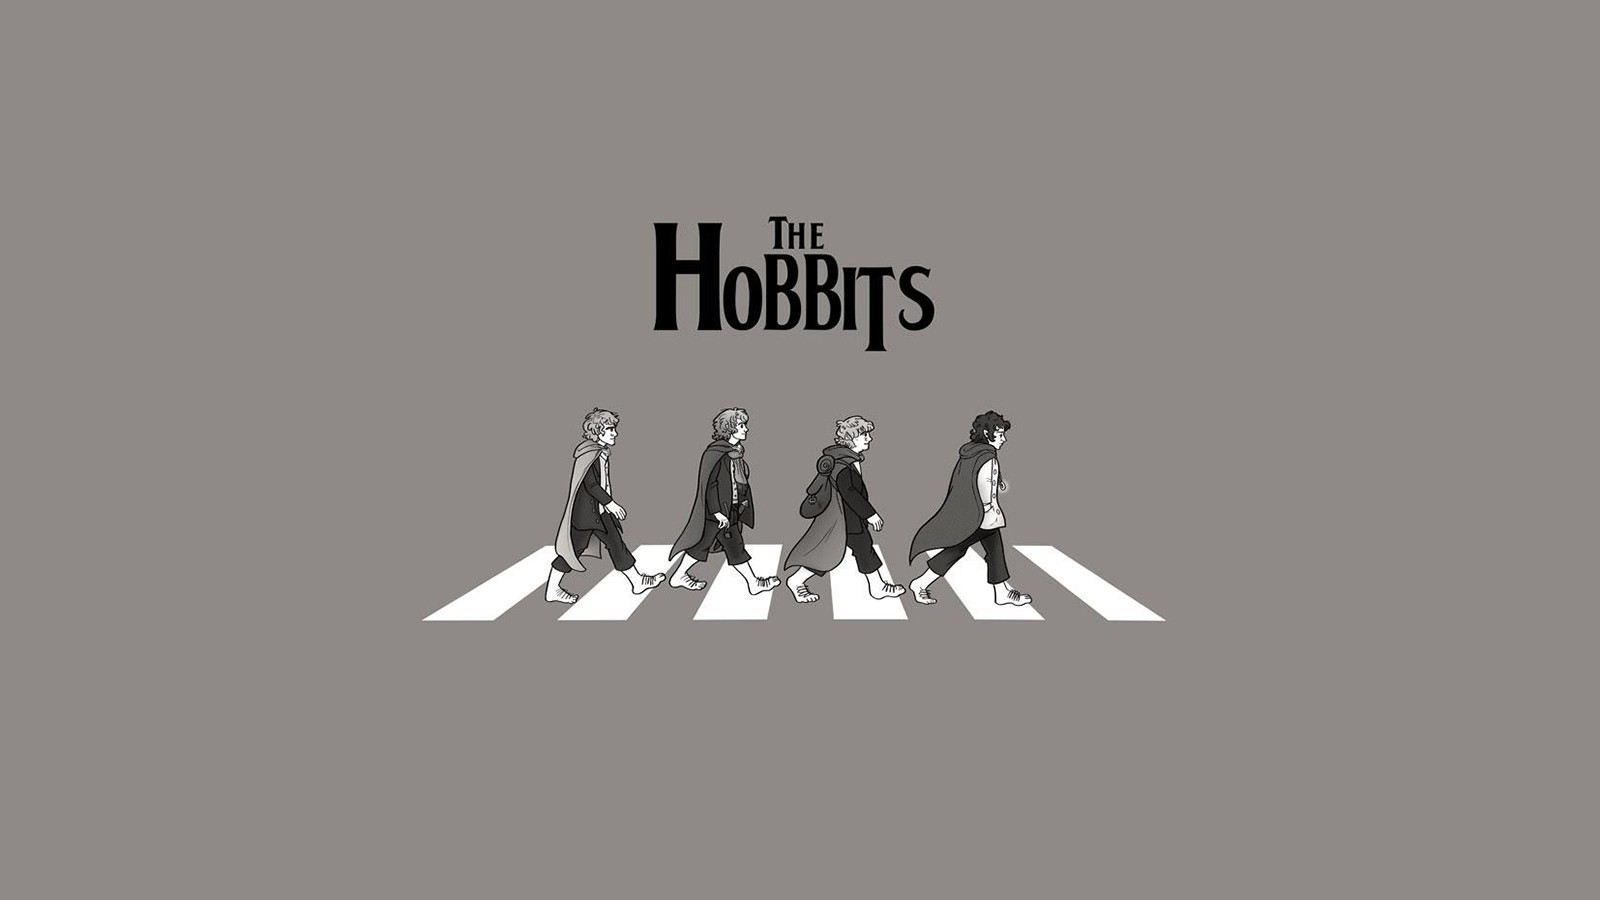 Wallpaper, illustration, monochrome, minimalism, text, logo, The Lord of the Rings, The Beatles, brand, font 1600x900